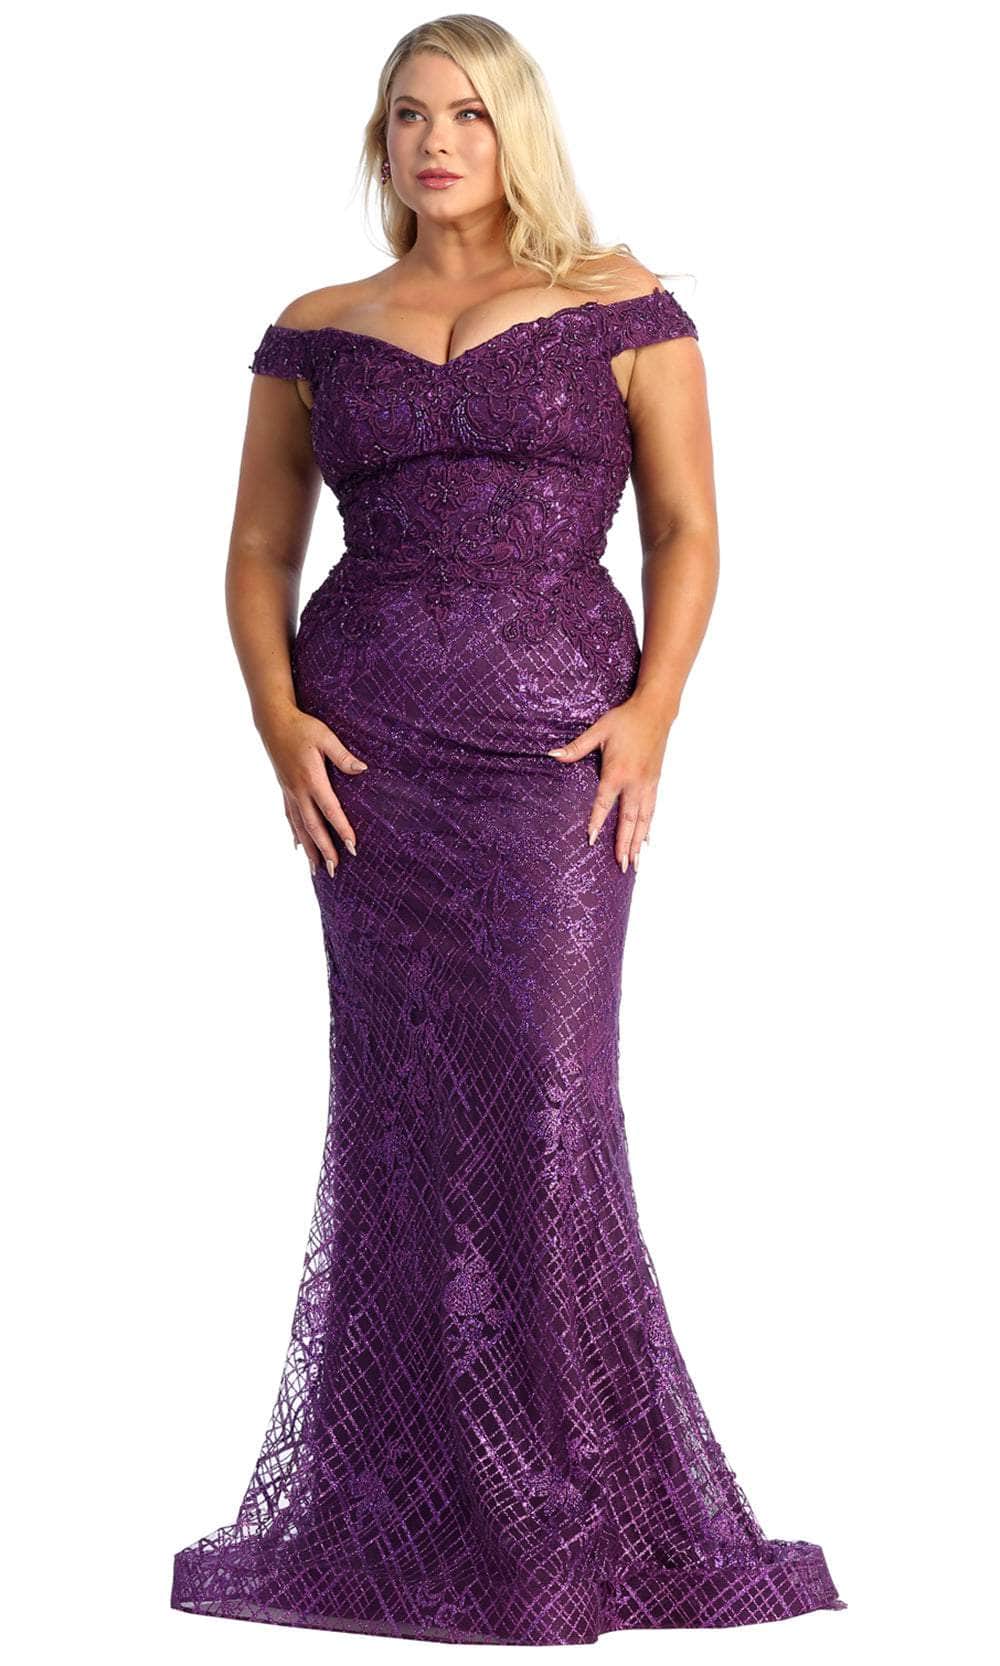 May Queen RQ7930 - Embroidered Sheath Evening Dress
